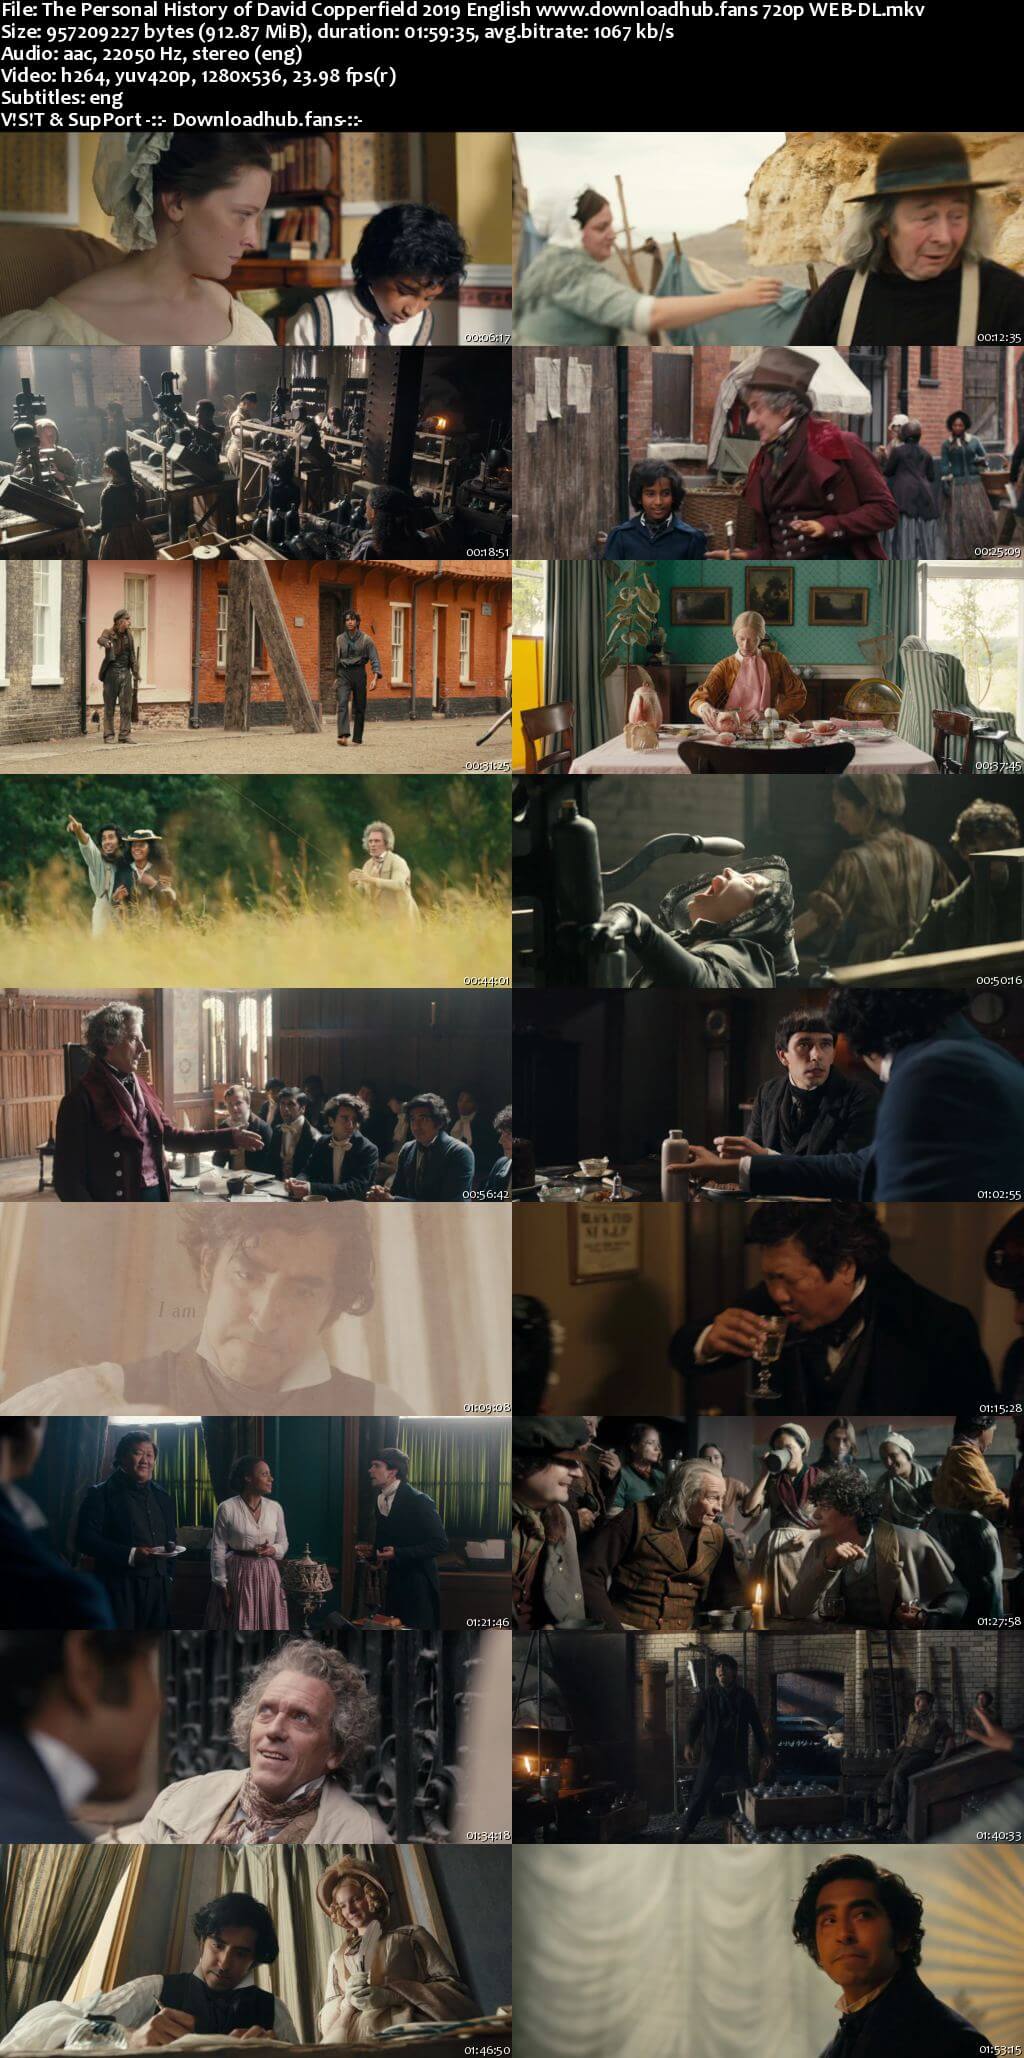 The Personal History of David Copperfield 2019 English 720p Web-DL 900MB ESubs